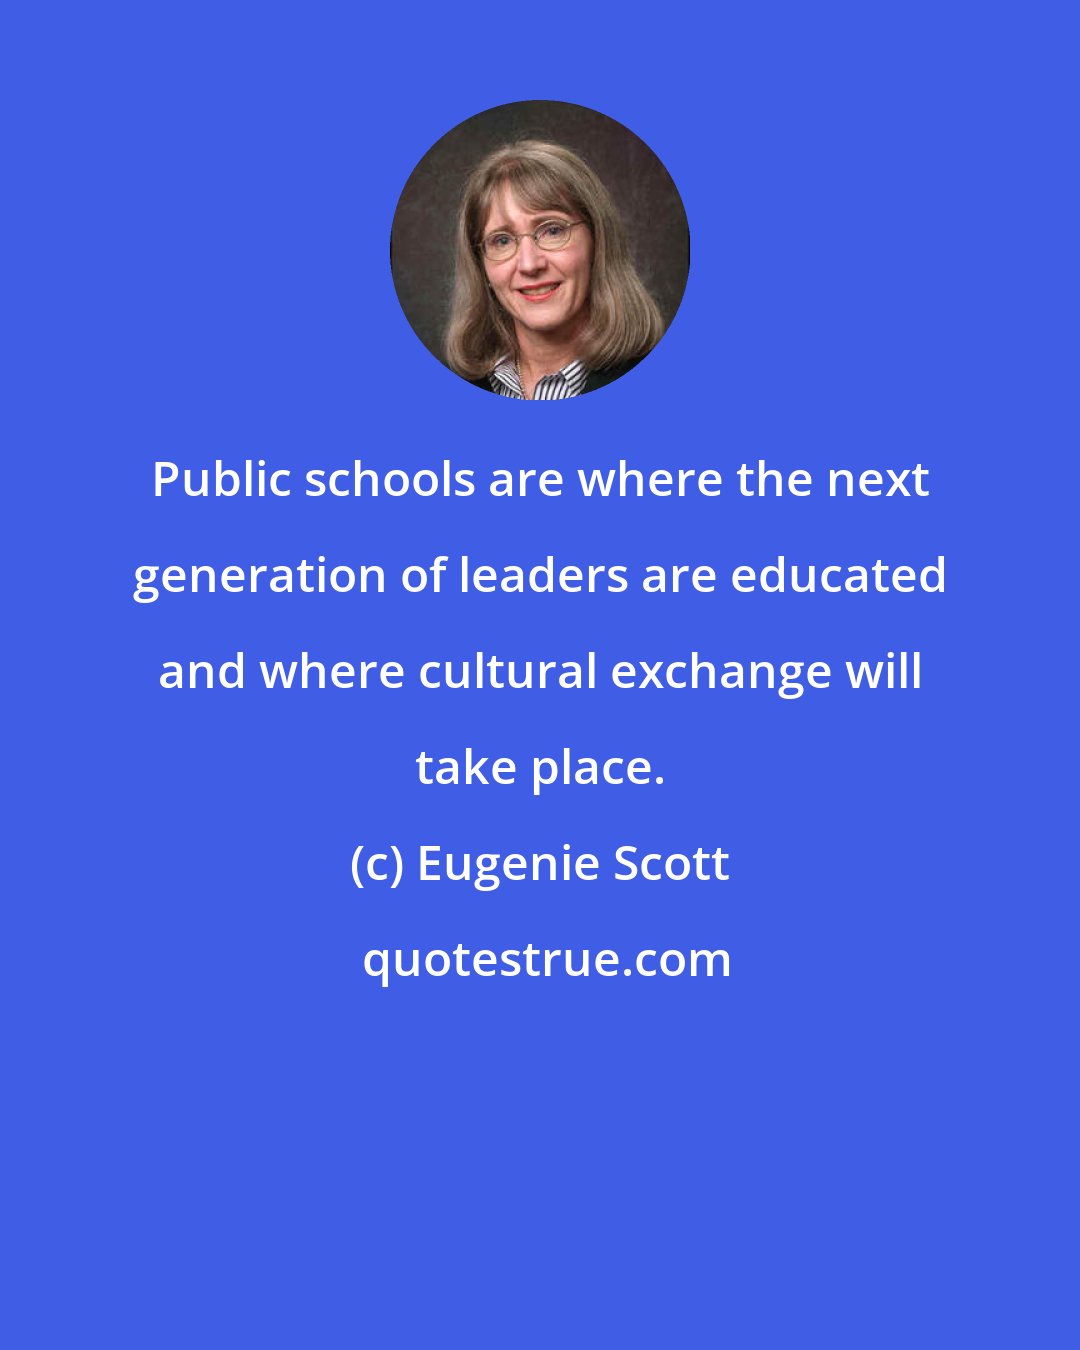 Eugenie Scott: Public schools are where the next generation of leaders are educated and where cultural exchange will take place.